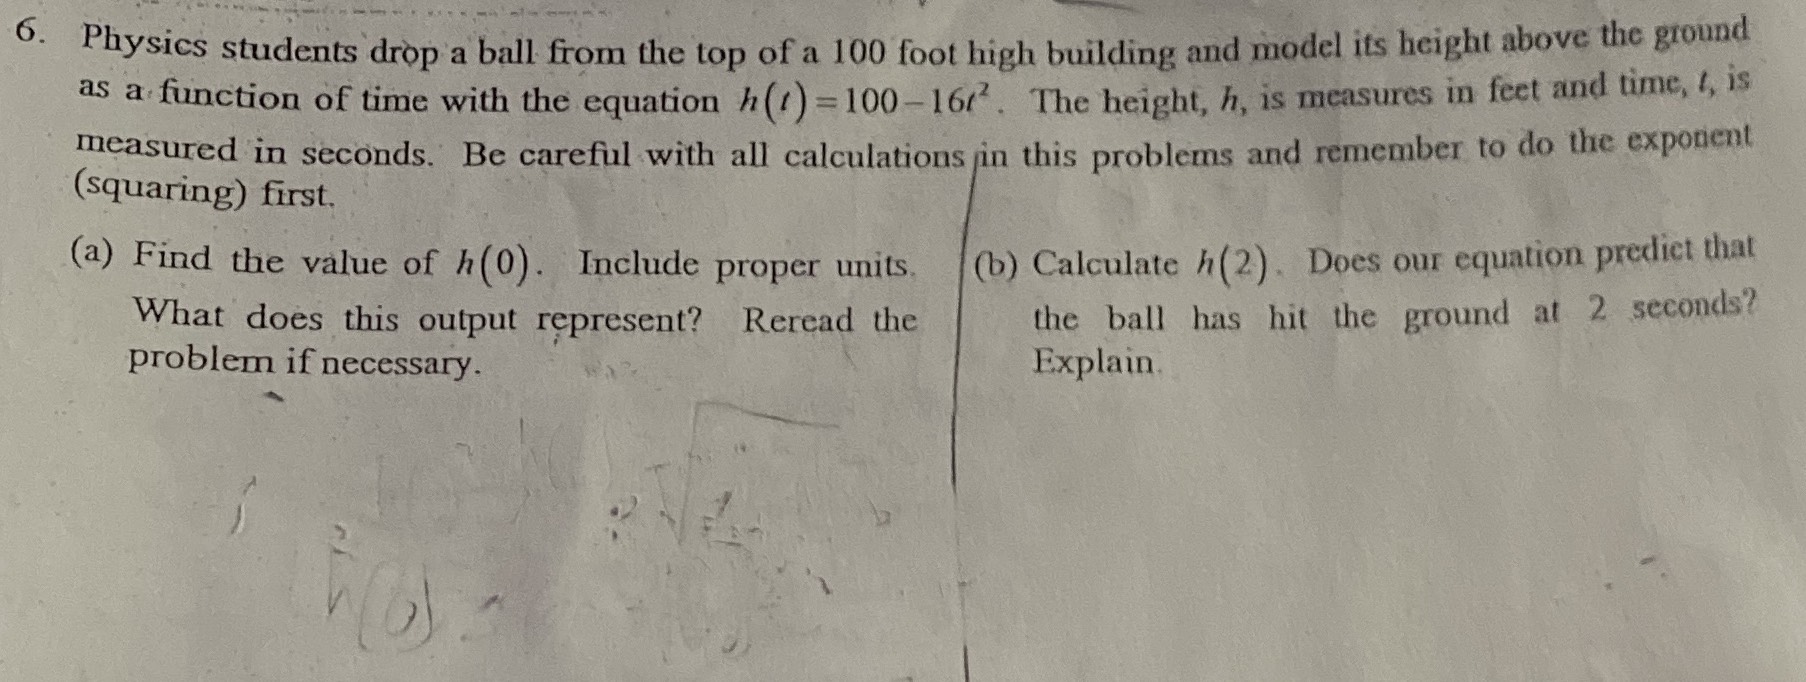 6. Physics students drop a ball from the top of a ...